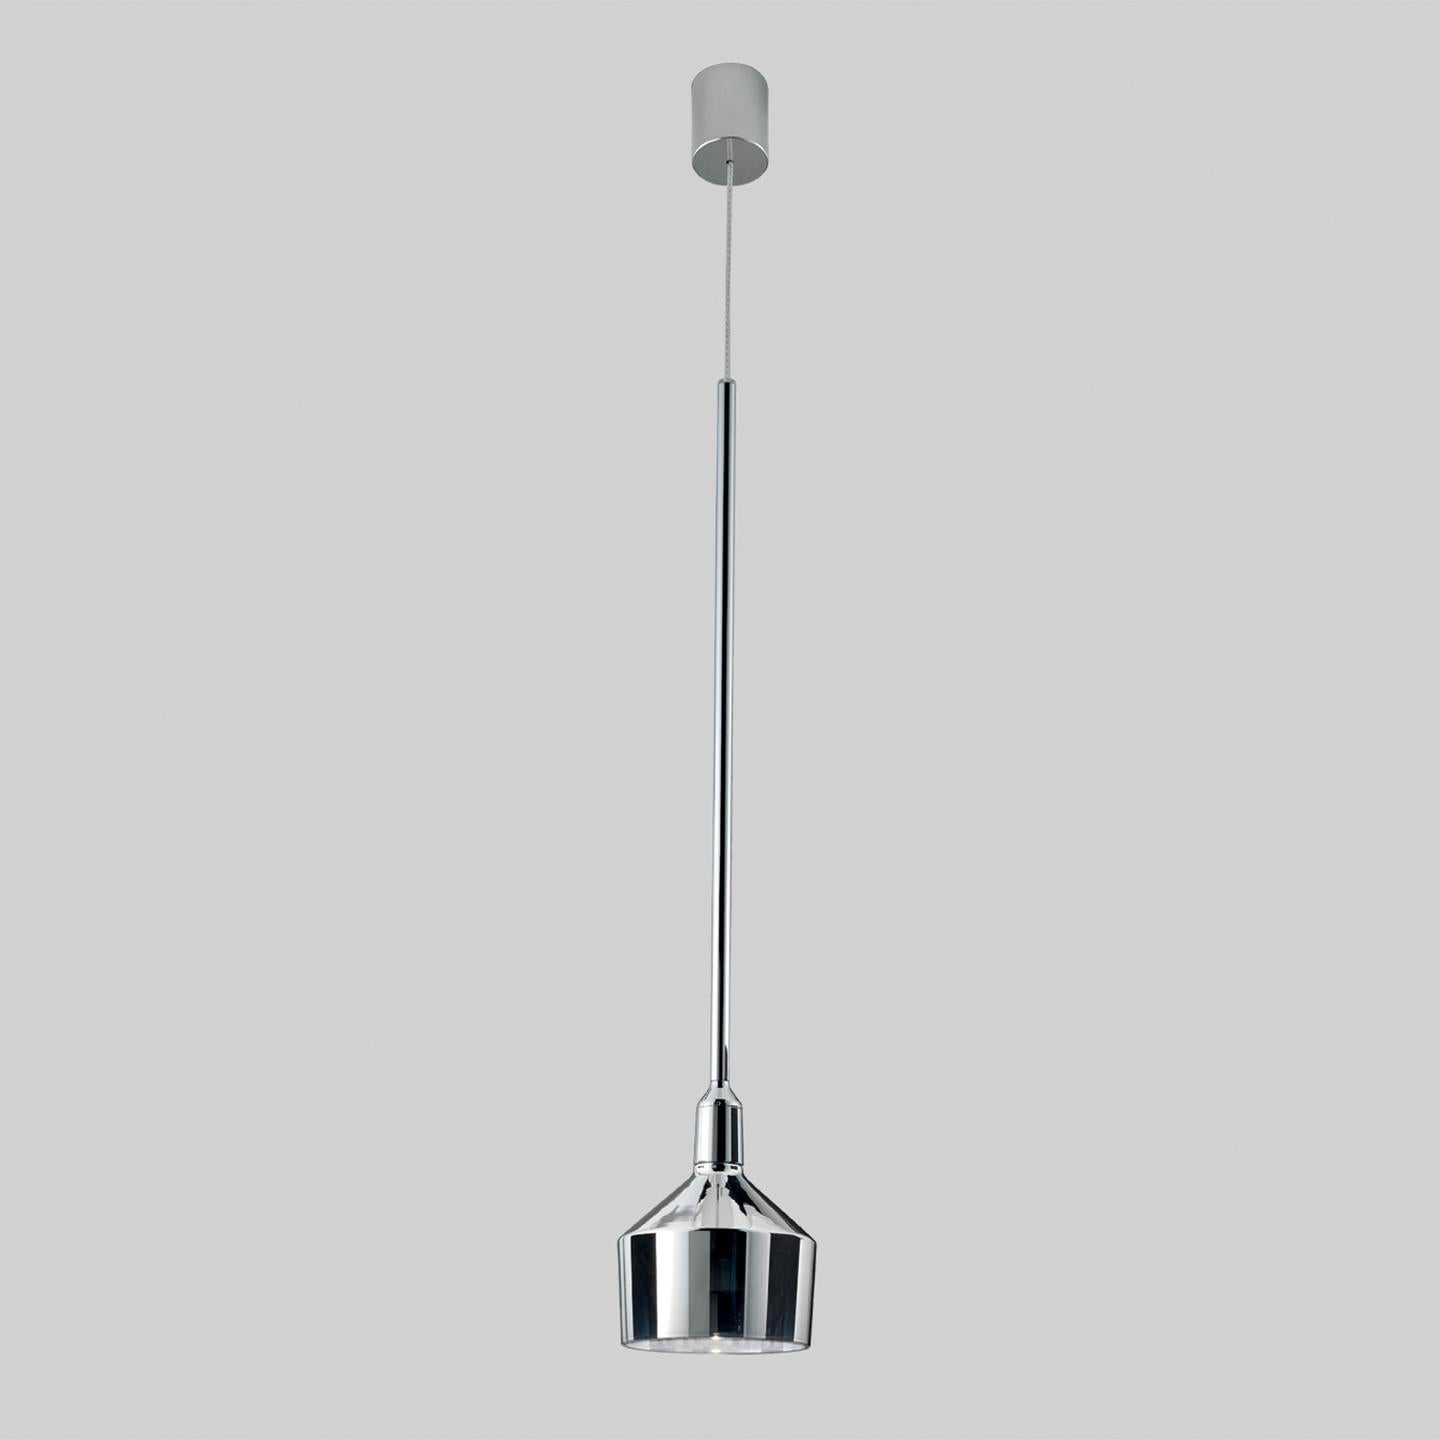 Arik Levy designed the Beamer pendant in 2013 to be a clever, multivariable pendant system. While the Beamer Pendant looks great as a standalone, the versatile pendant can be customized into three and five multipoint systems and comes in two sizes.